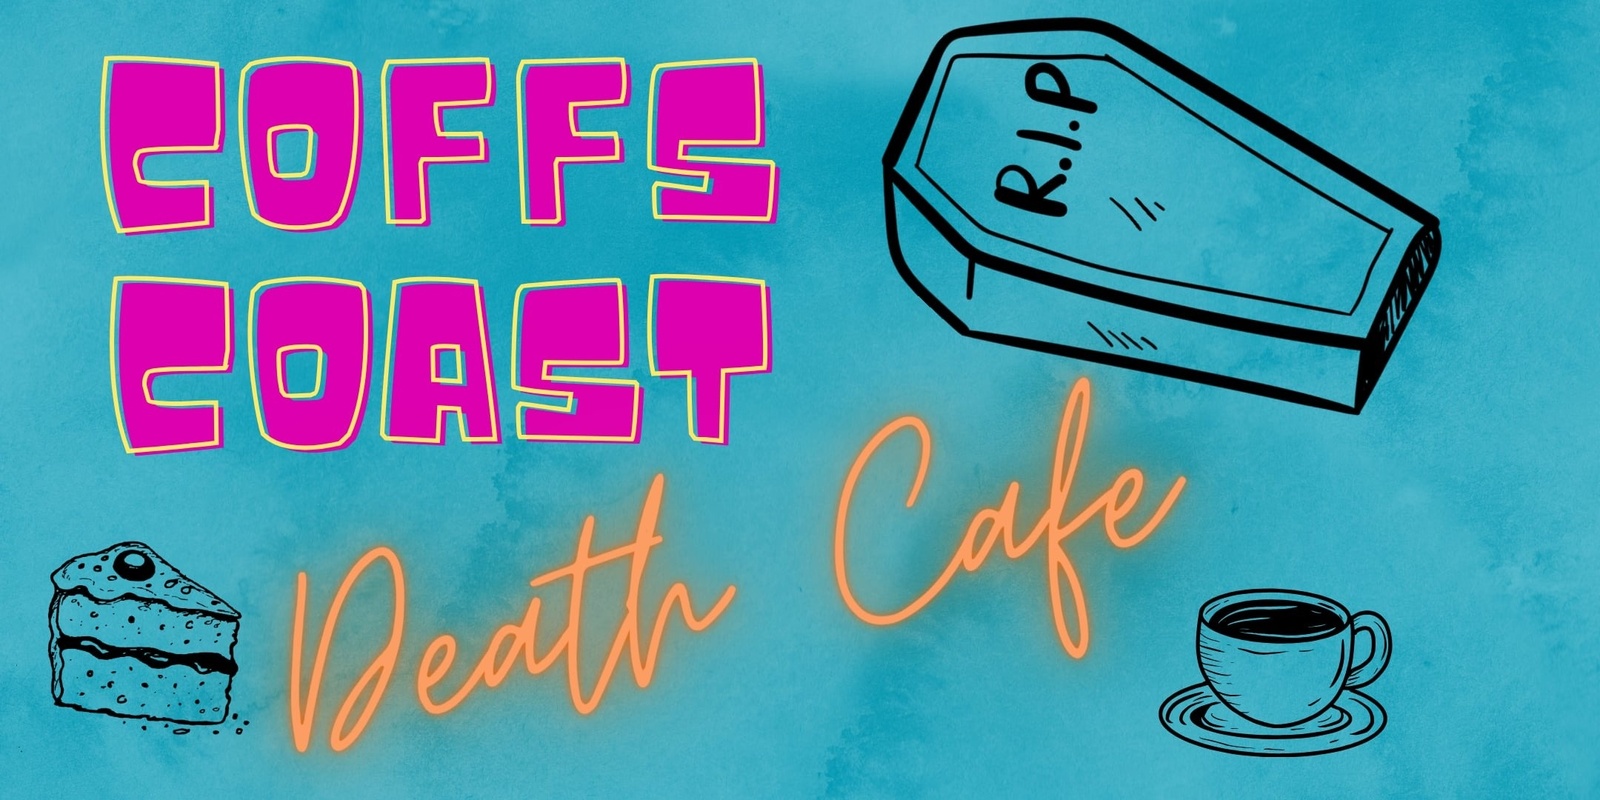 Banner image for May Coffs Coast Death Cafe